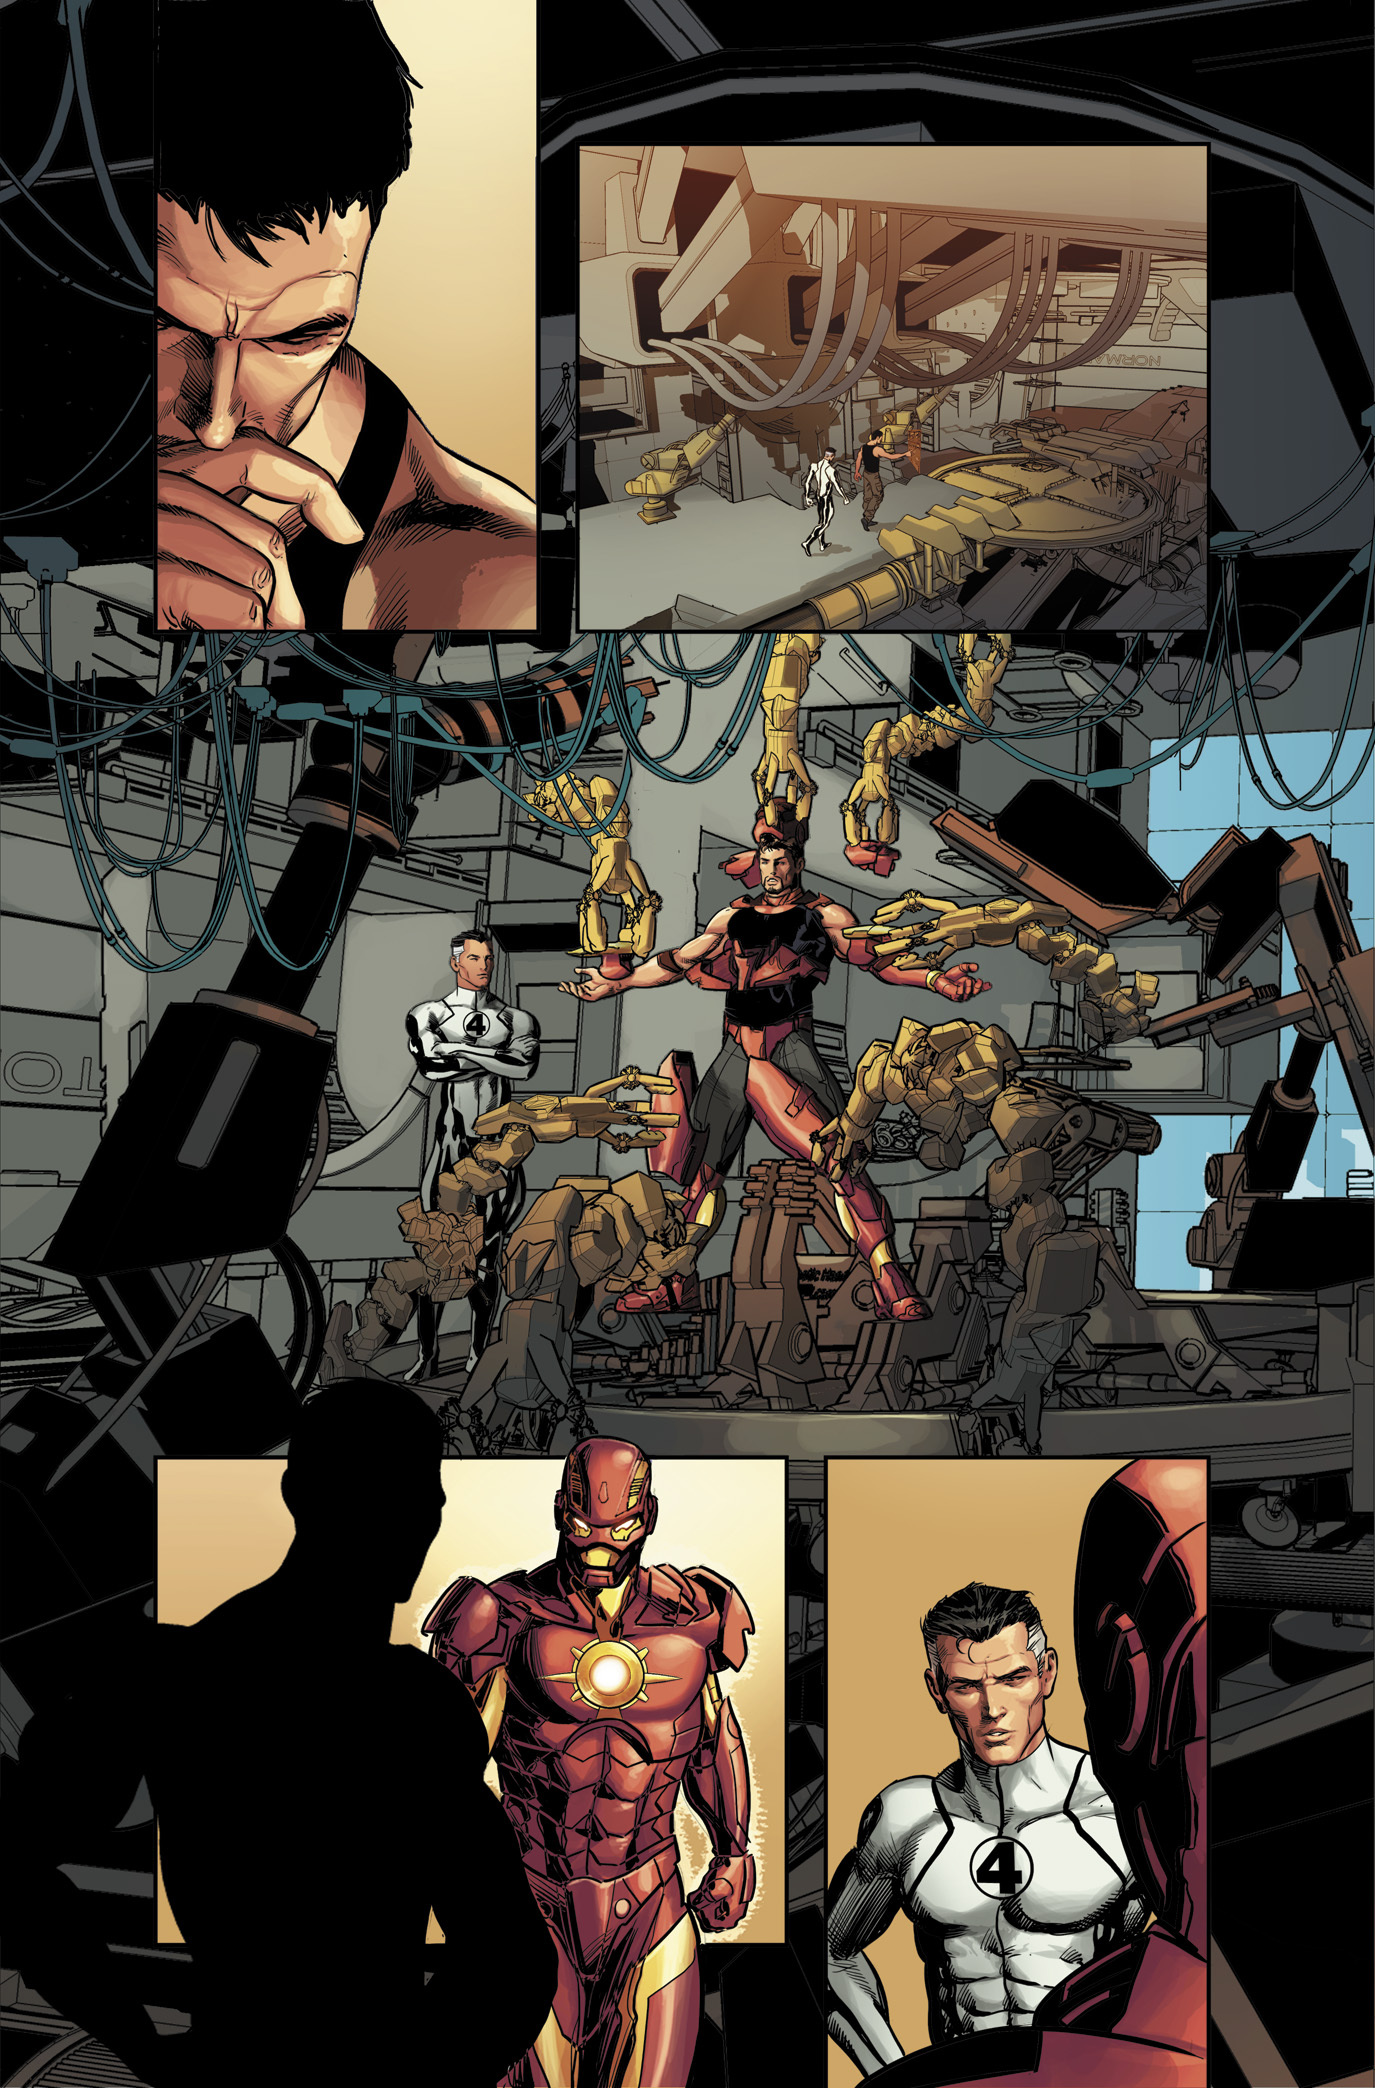 NEW AVENGERS #8 Preview 2 art by MIKE DEODATO